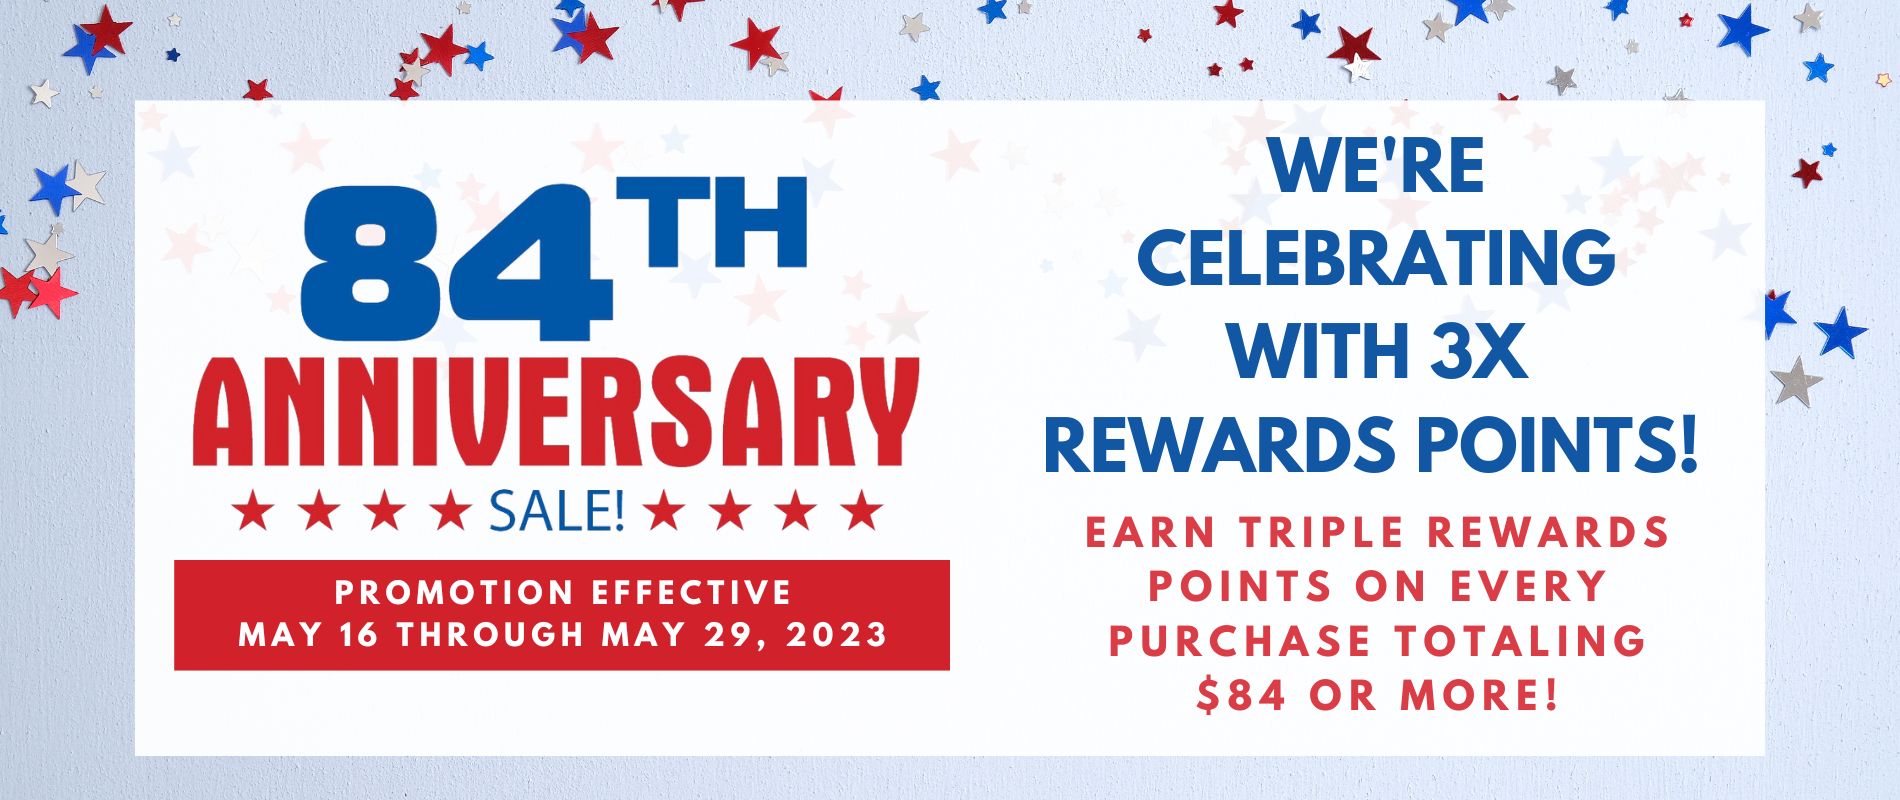 We&#8217;re celebrating our 84th anniversary with 3x rewards points on every purchase totaling $84 or more!